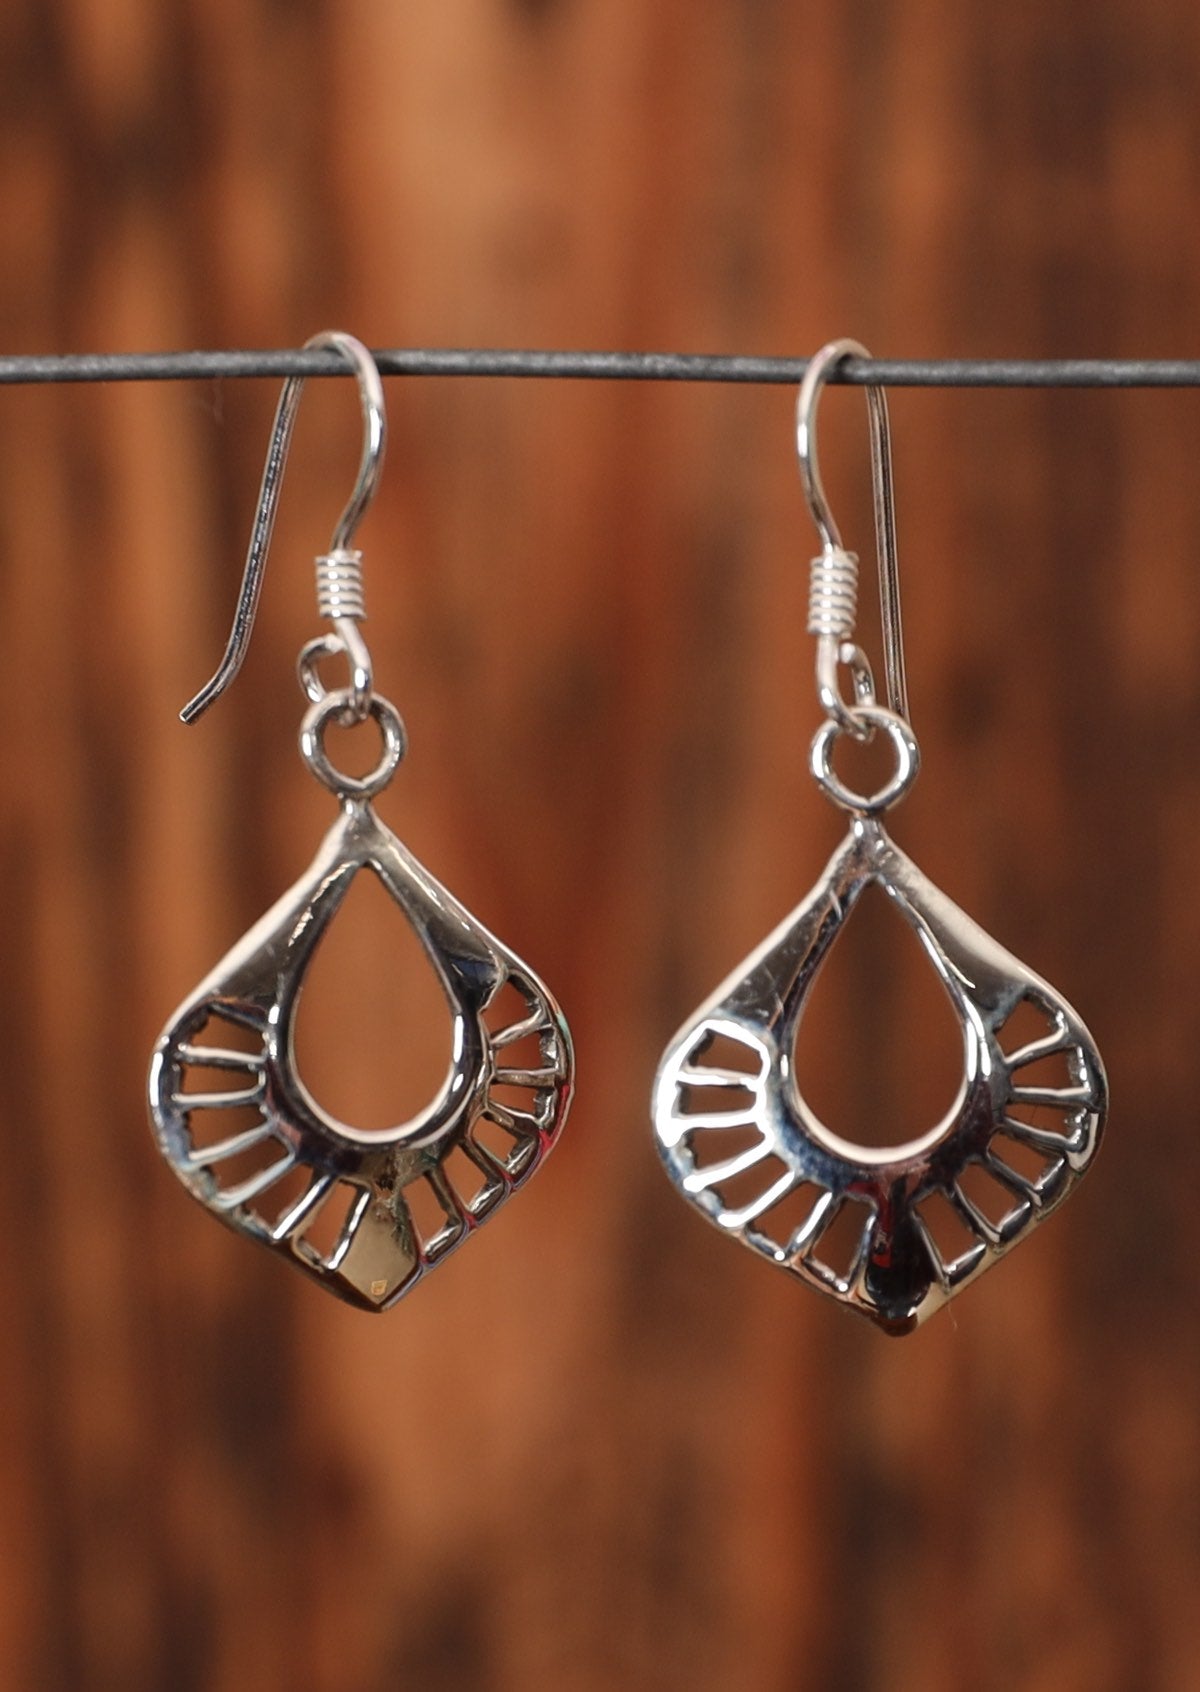 92.5% silver curved nouveau style earrings on a wire for display